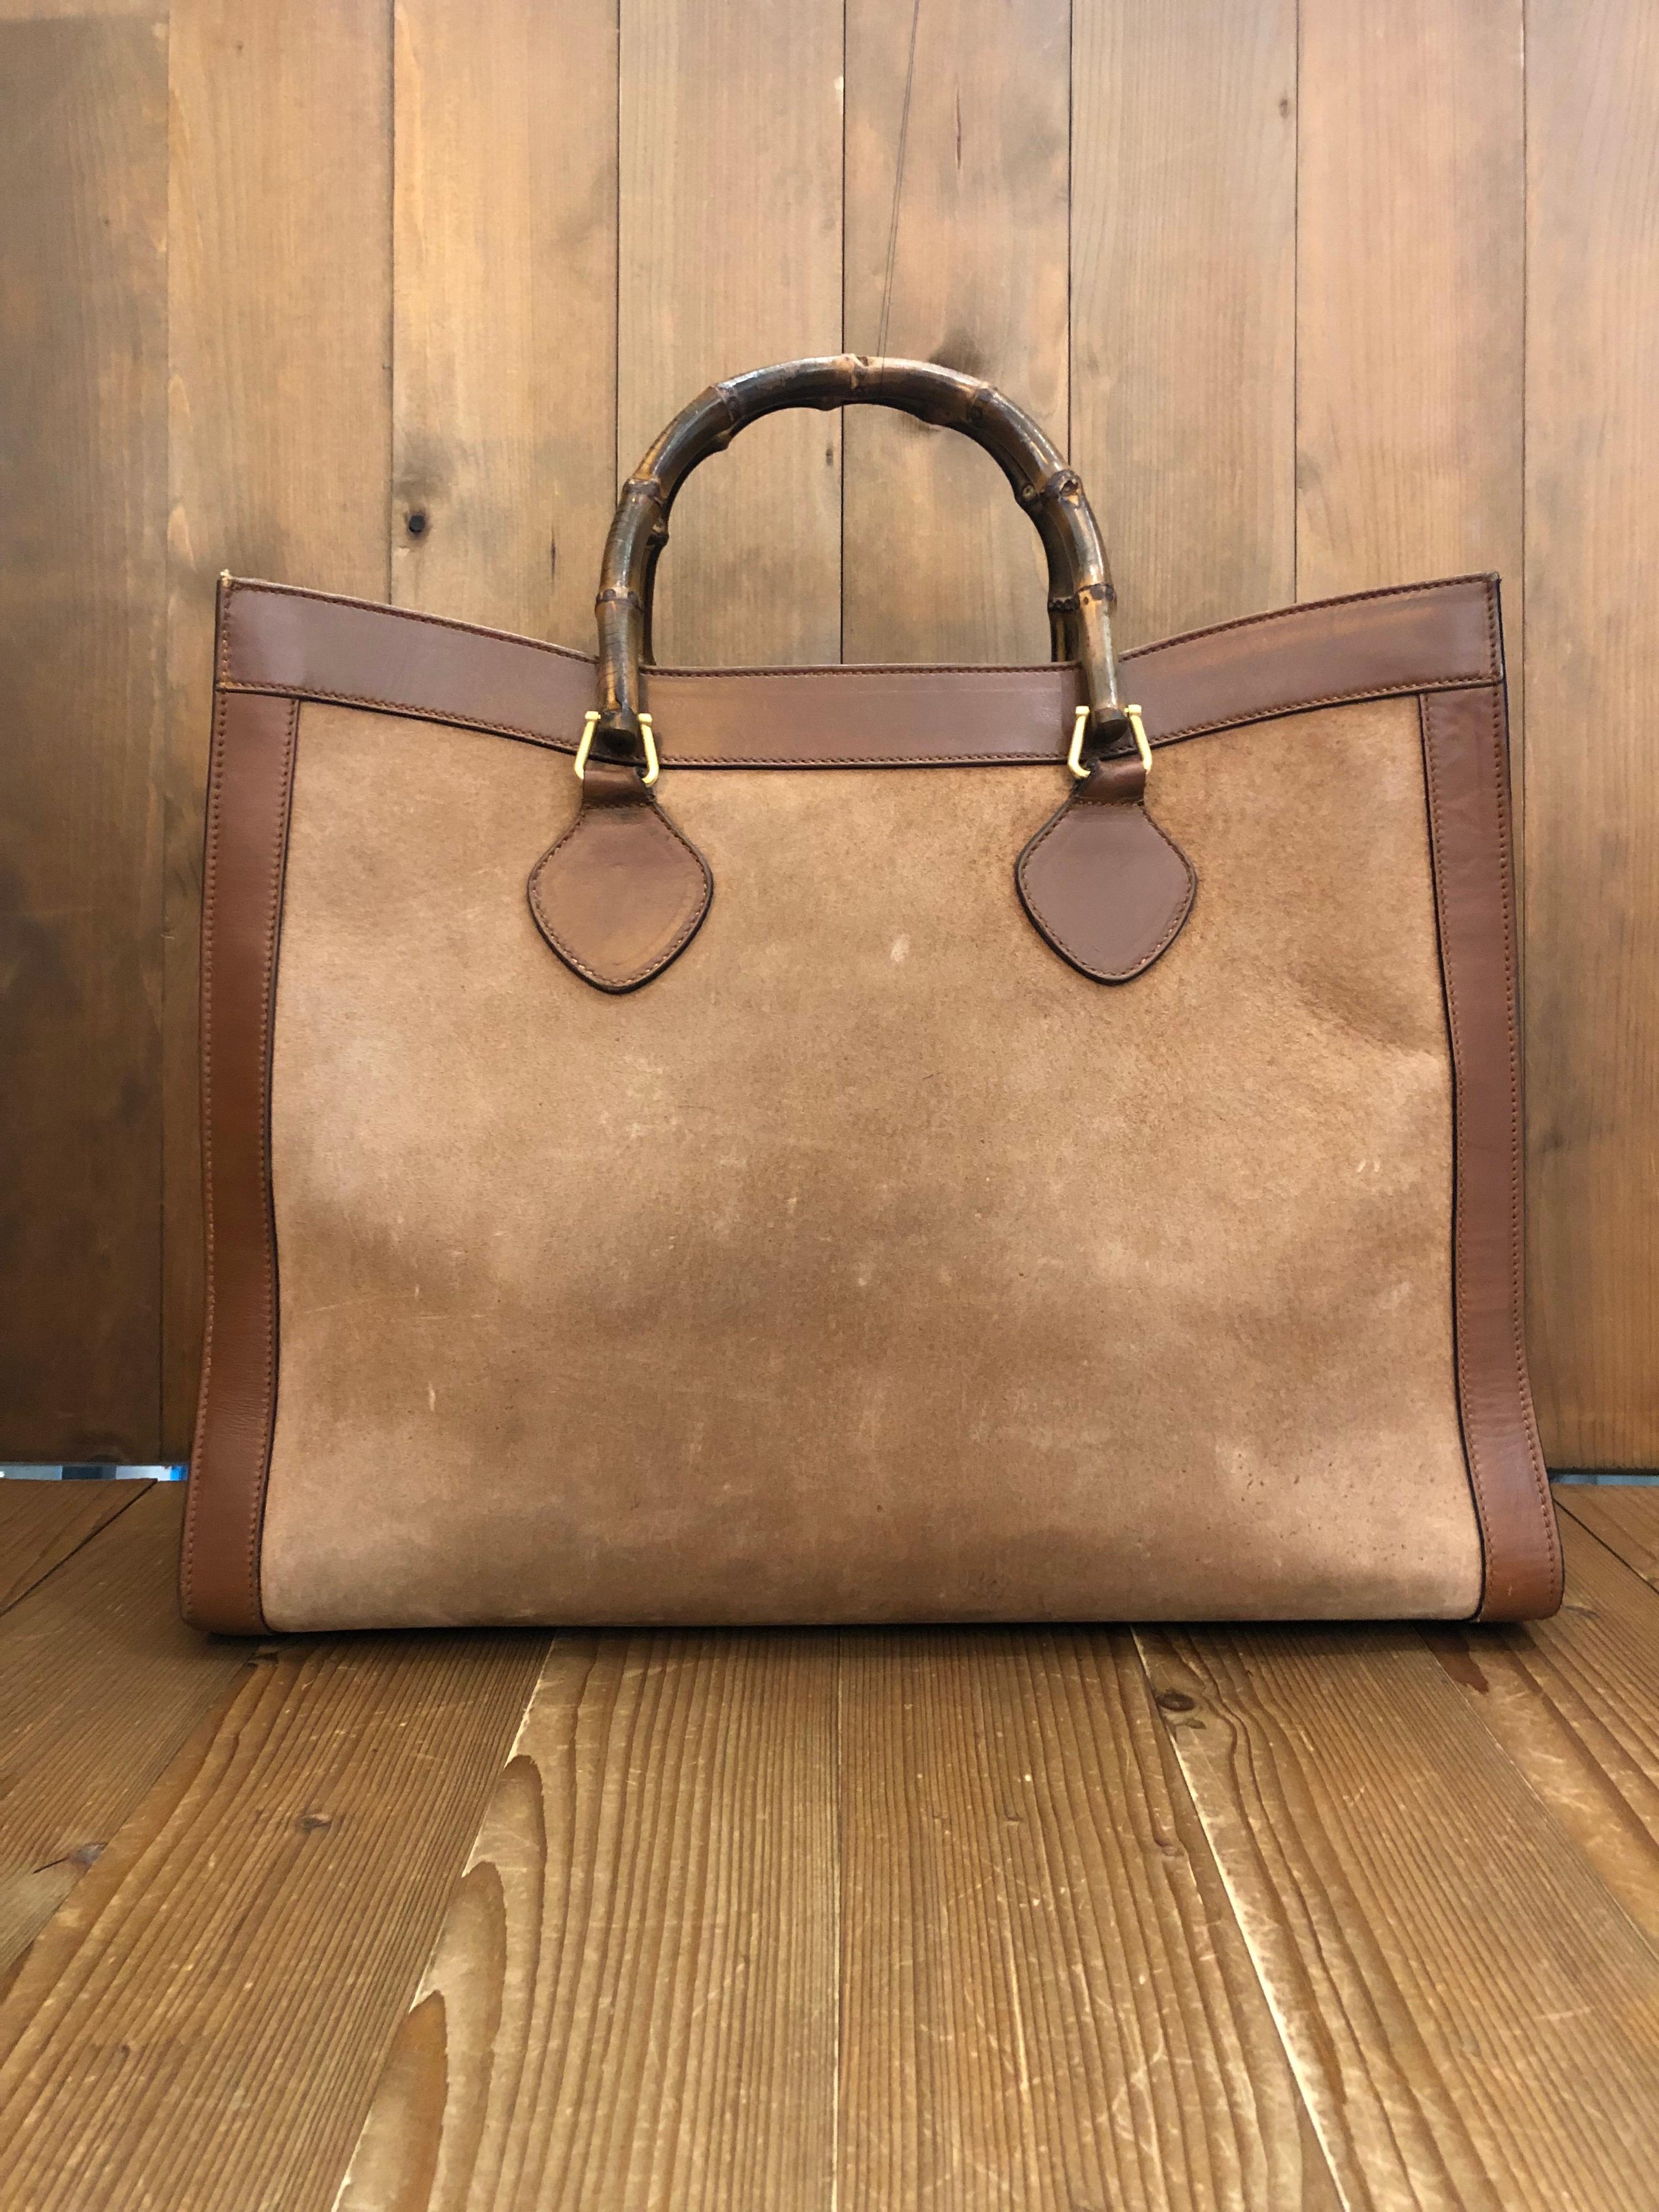 This large 1990s Gucci Diana bamboo tote is crafted of brown suede and leather. The Bamboo tote is one of Princess Diana's favorite purses. This Gucci bamboo tote features one very spacious interior and one zippered pocket. Gucci revamped this